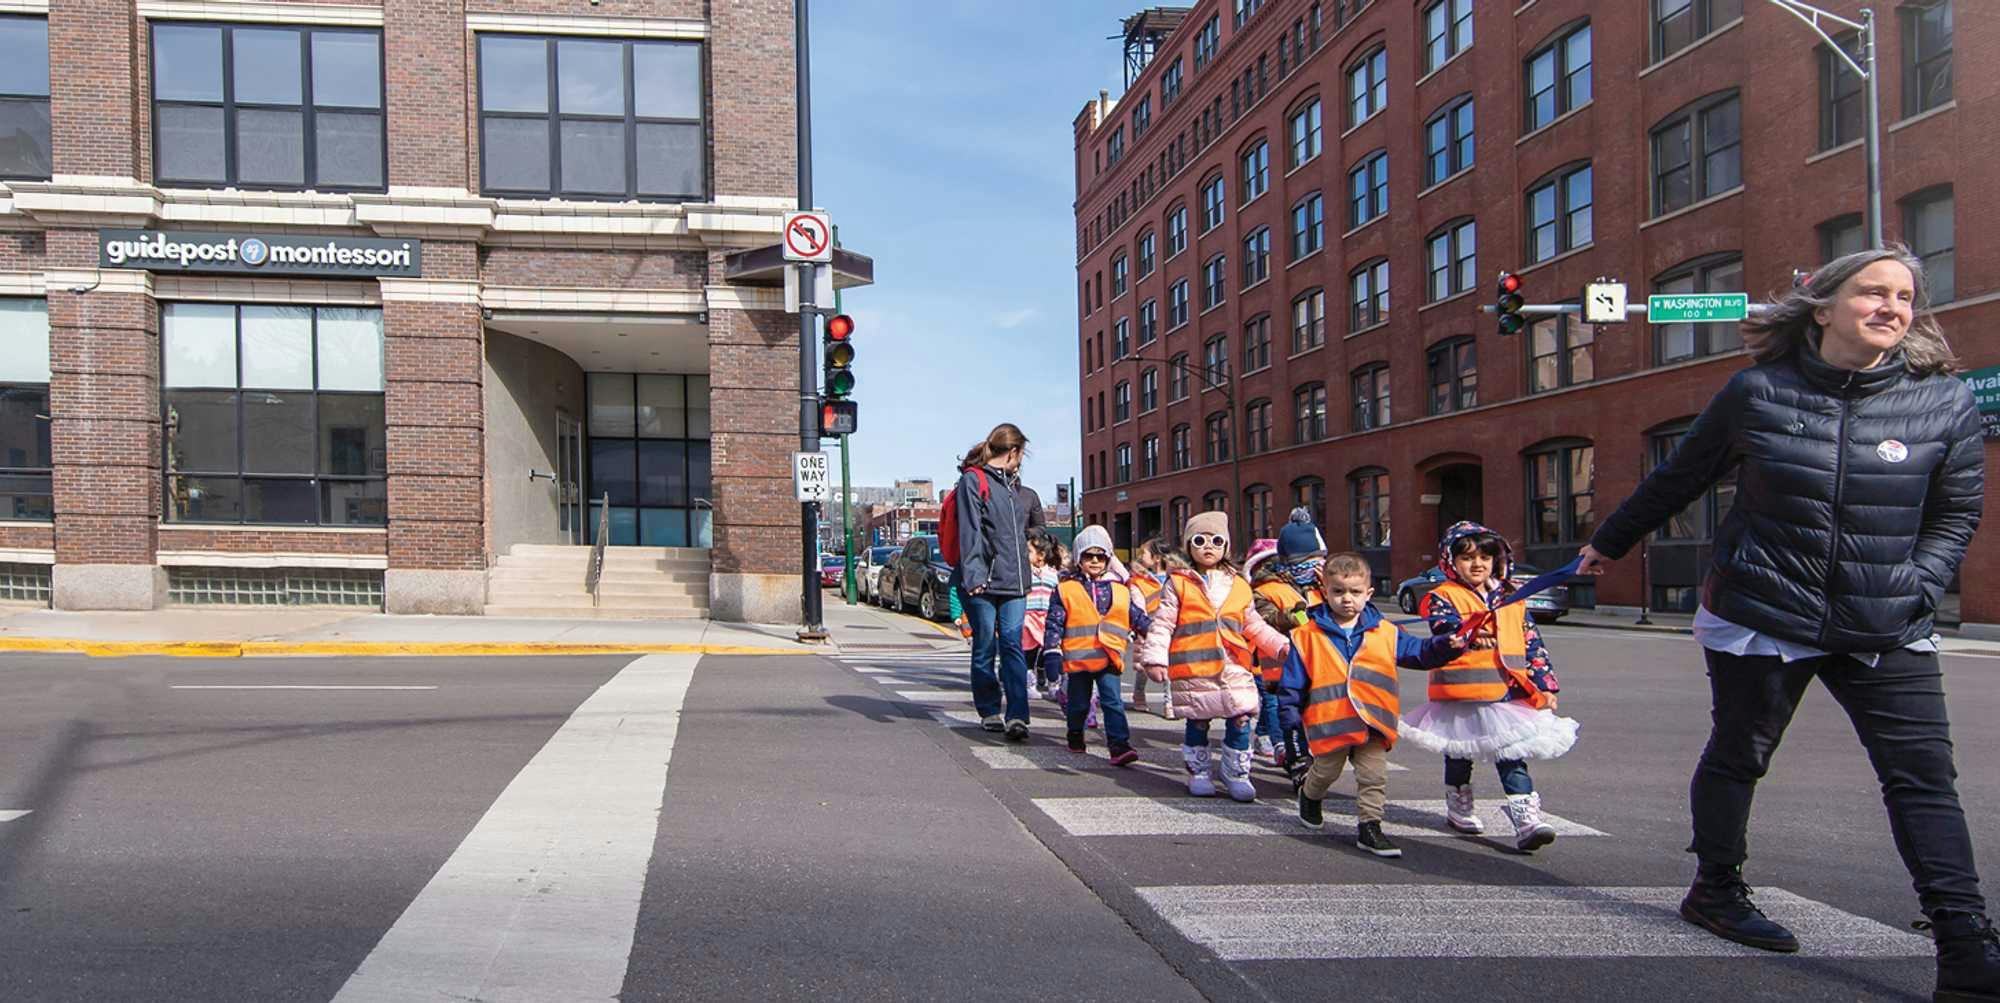 View of Guidepost Montessori at West Loop from the street that shows a class of students in orange safety vests walking in a crosswalk away from the campus. The school is a corner building behind the children and a branded Guidepost Montessori sign can be seen hanging above some windows. Other large buildings and blue skies loom in the background.